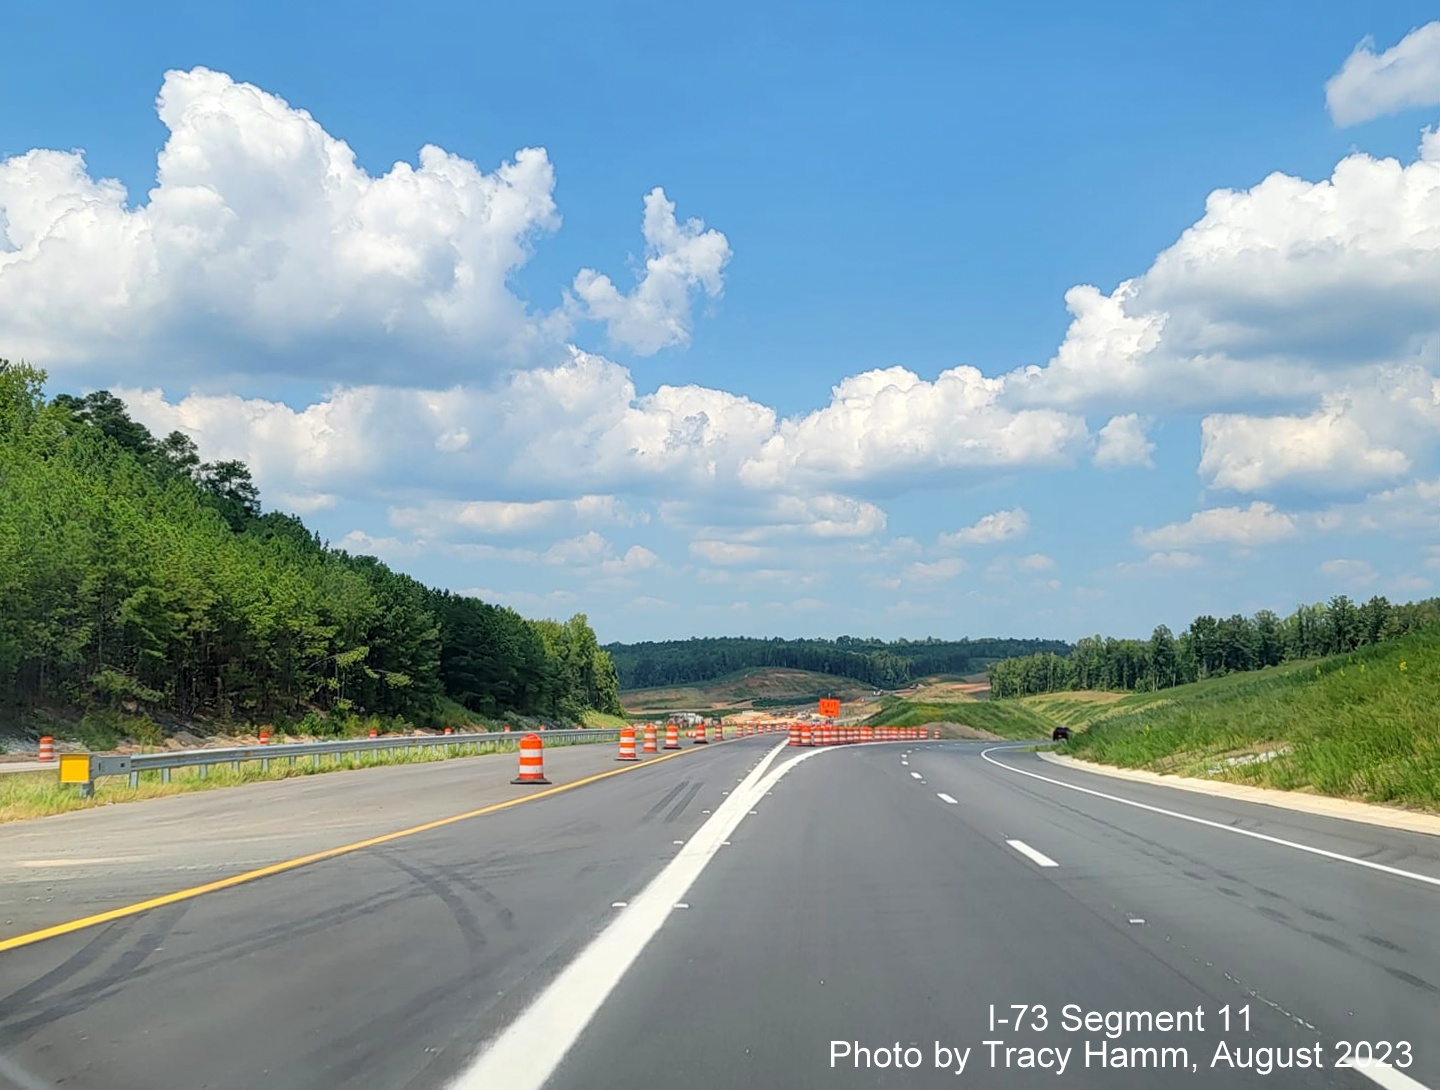 Image of US 74 West roadway using new exit ramp from future I-73/I-74 at Rockingham Bypass interchange, by Tracy Hamm, August 2023